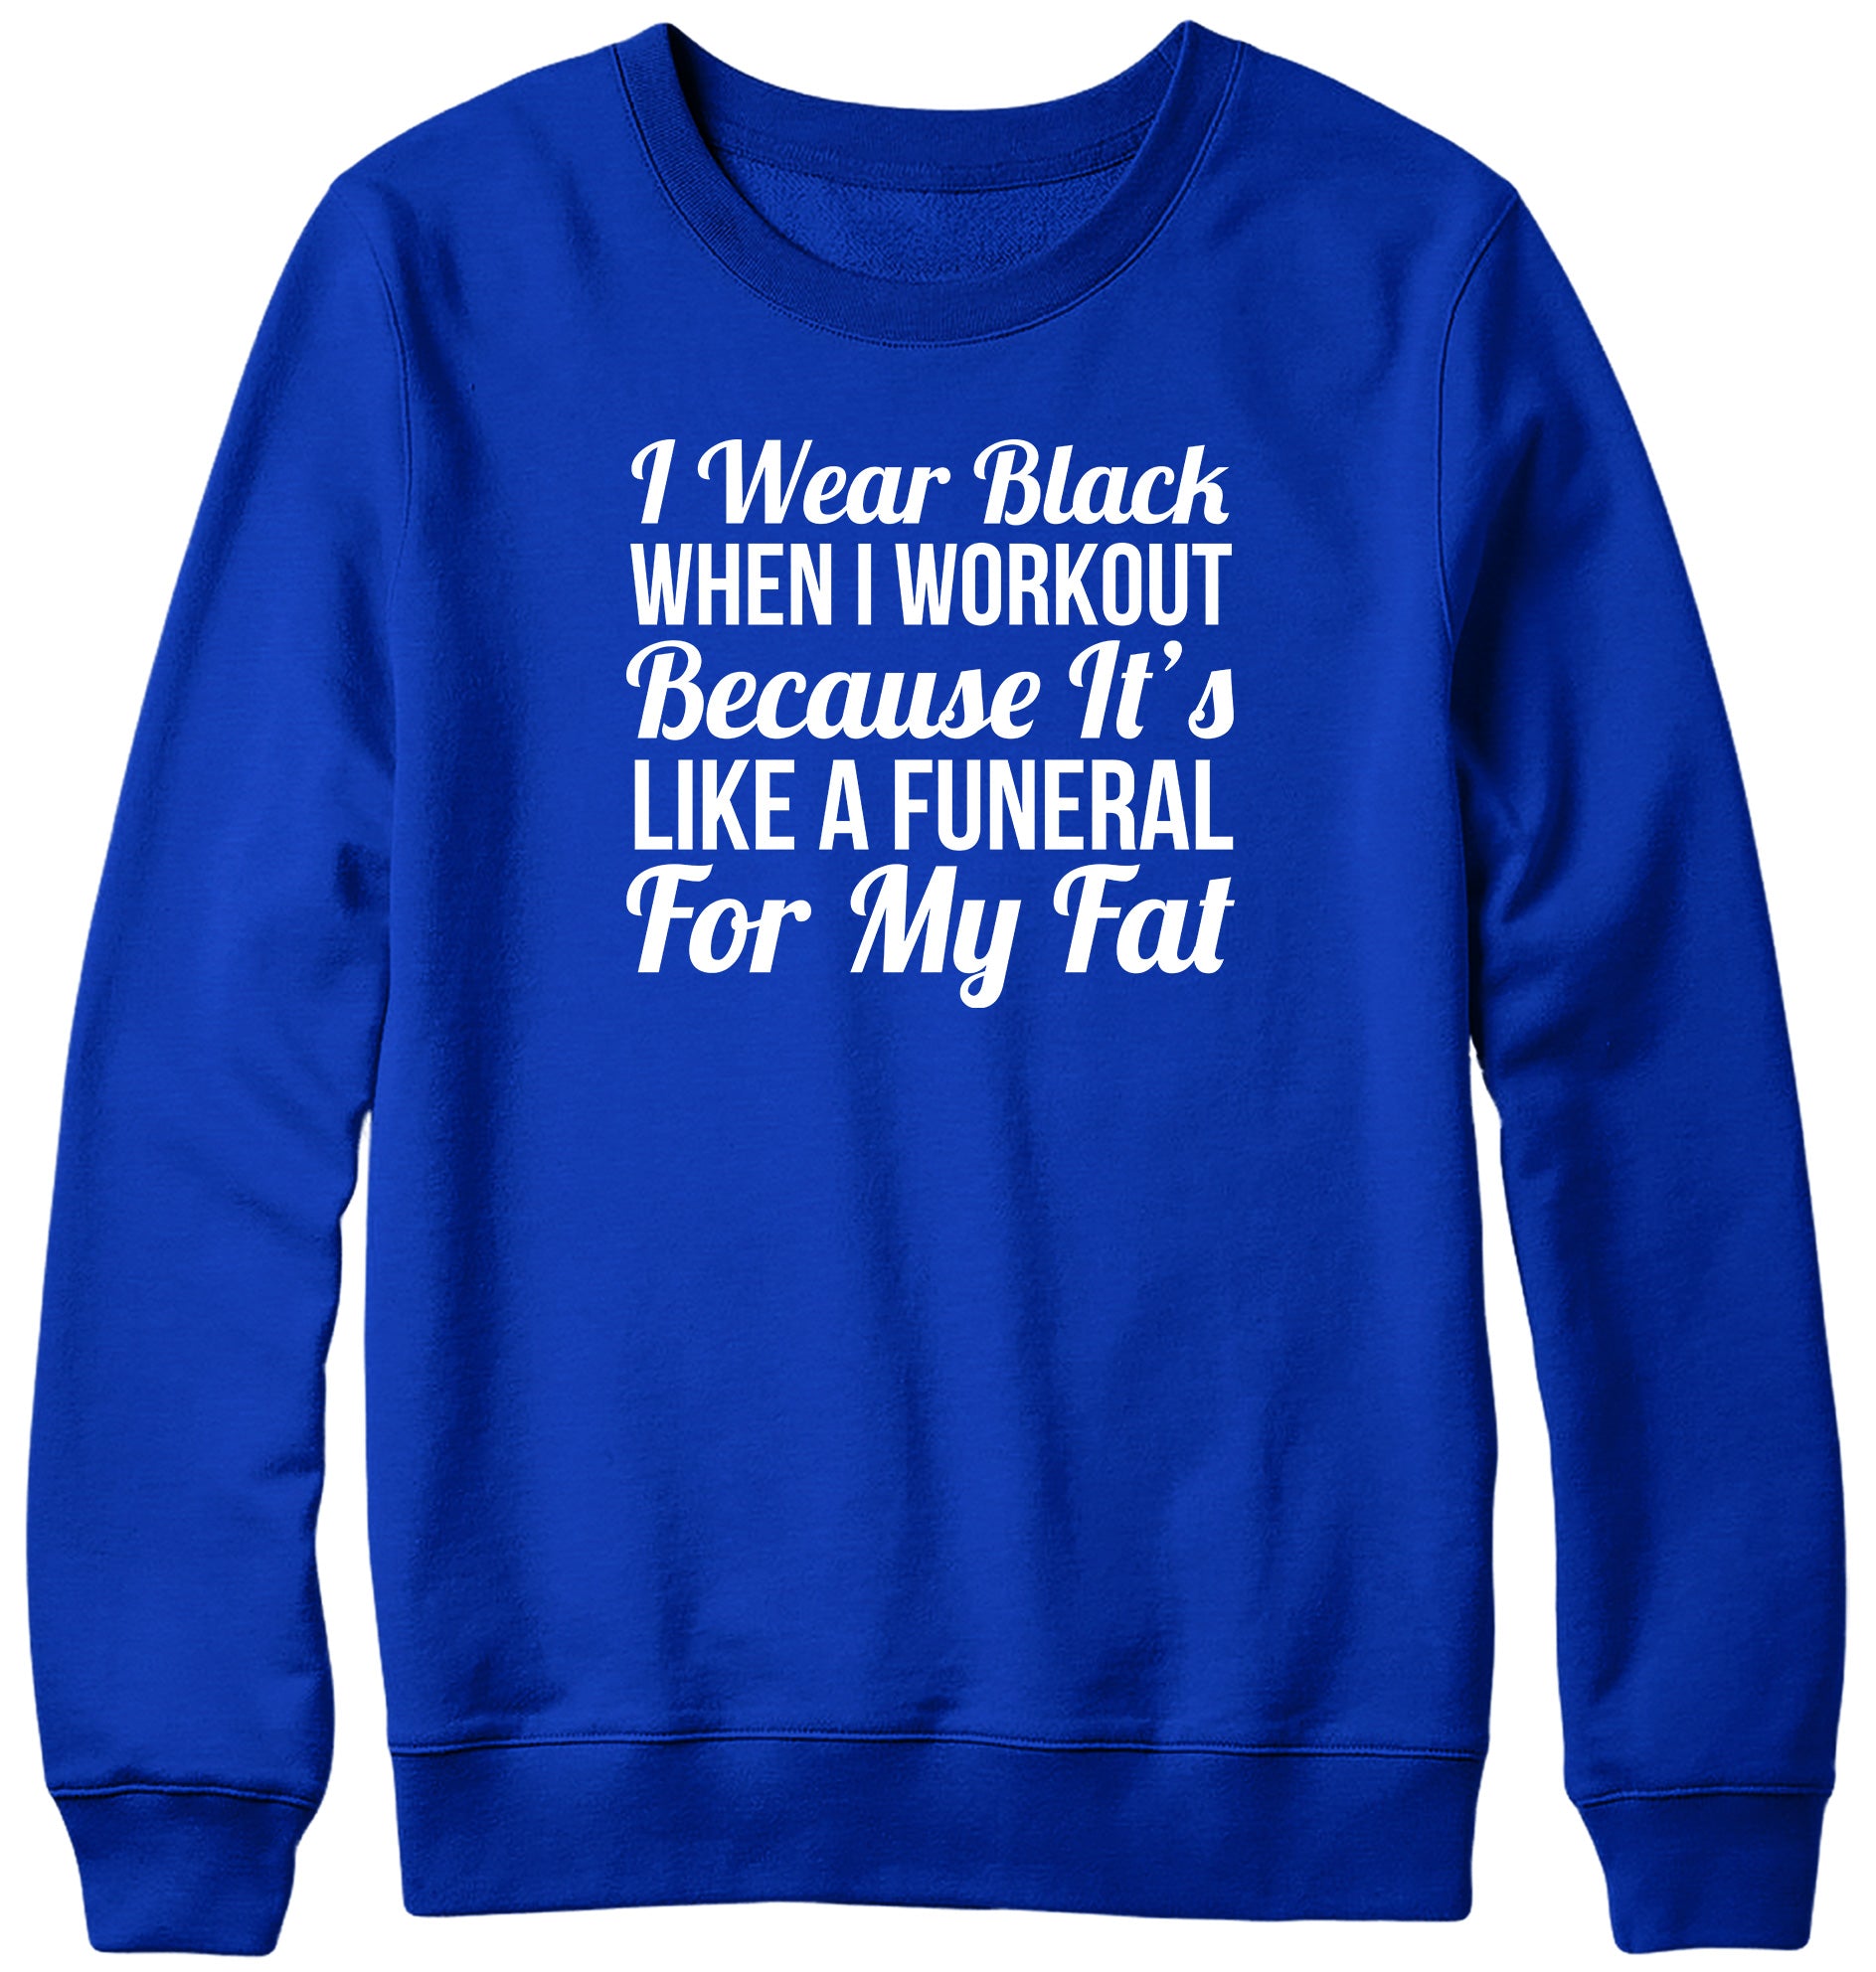 I WEAR BLACK WHEN I WORKOUT BECAUSE IT'S LIKE A FUNERAL FOR MY FAT WOMENS LADIES MENS UNISEX SWEATSHIRT